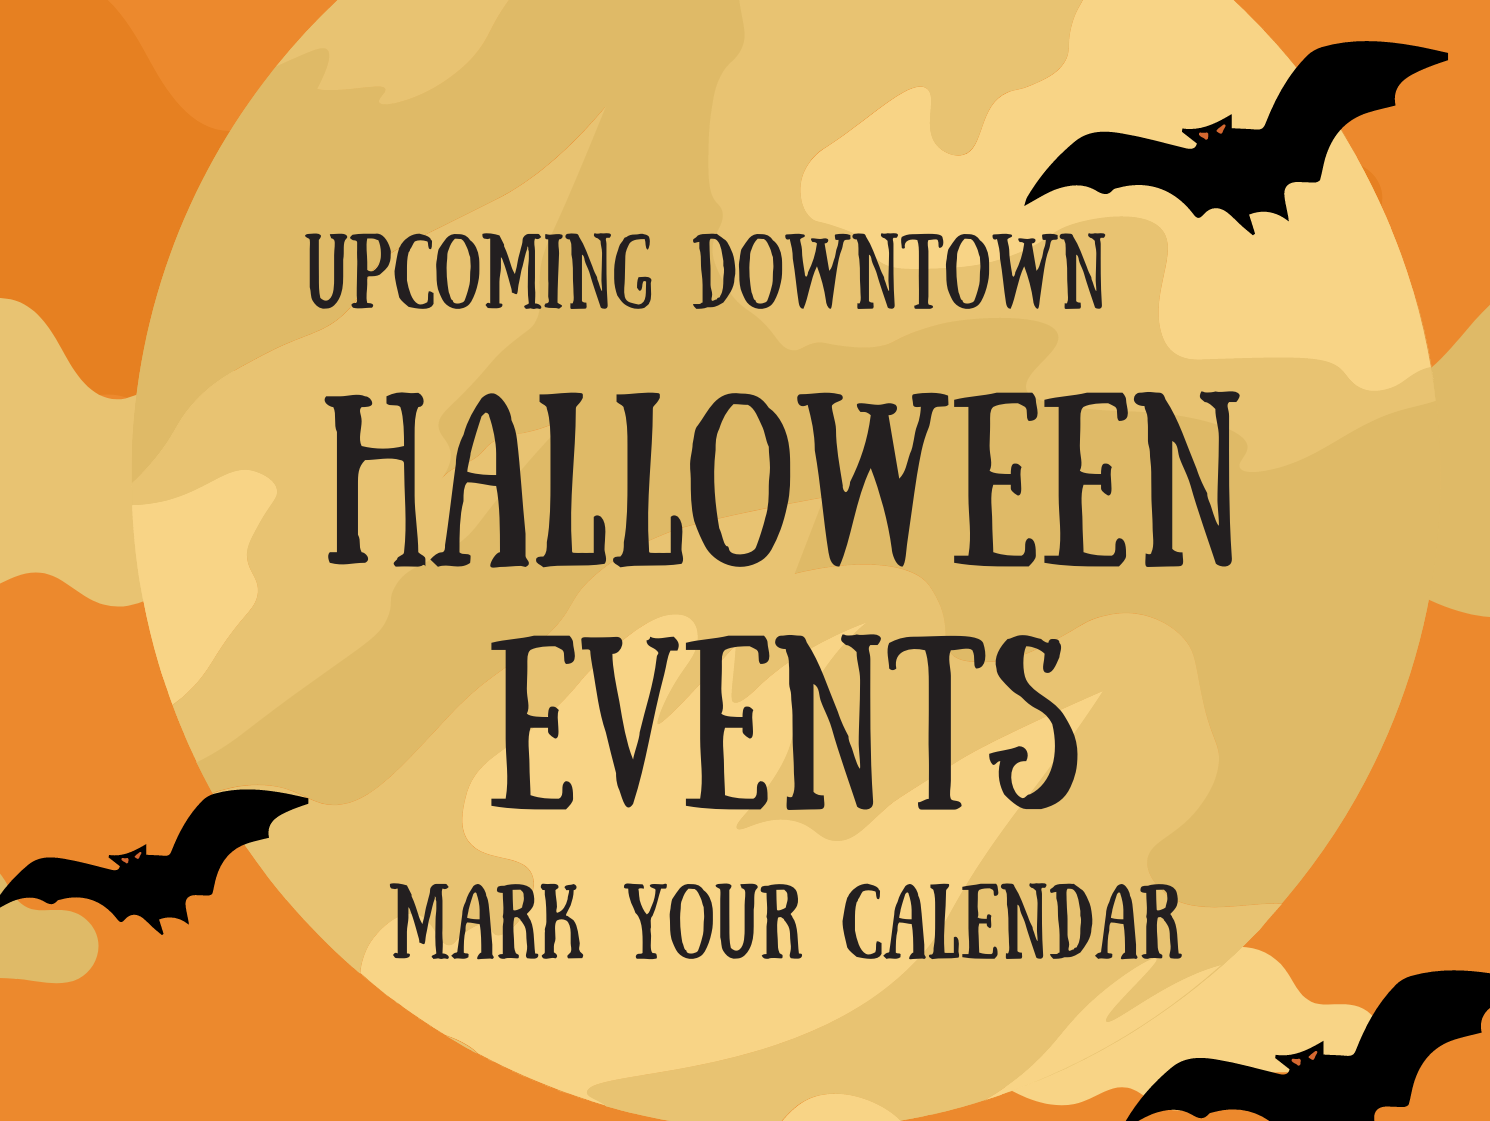 Halloween Season is upon us and there are some great events taking place downtown!